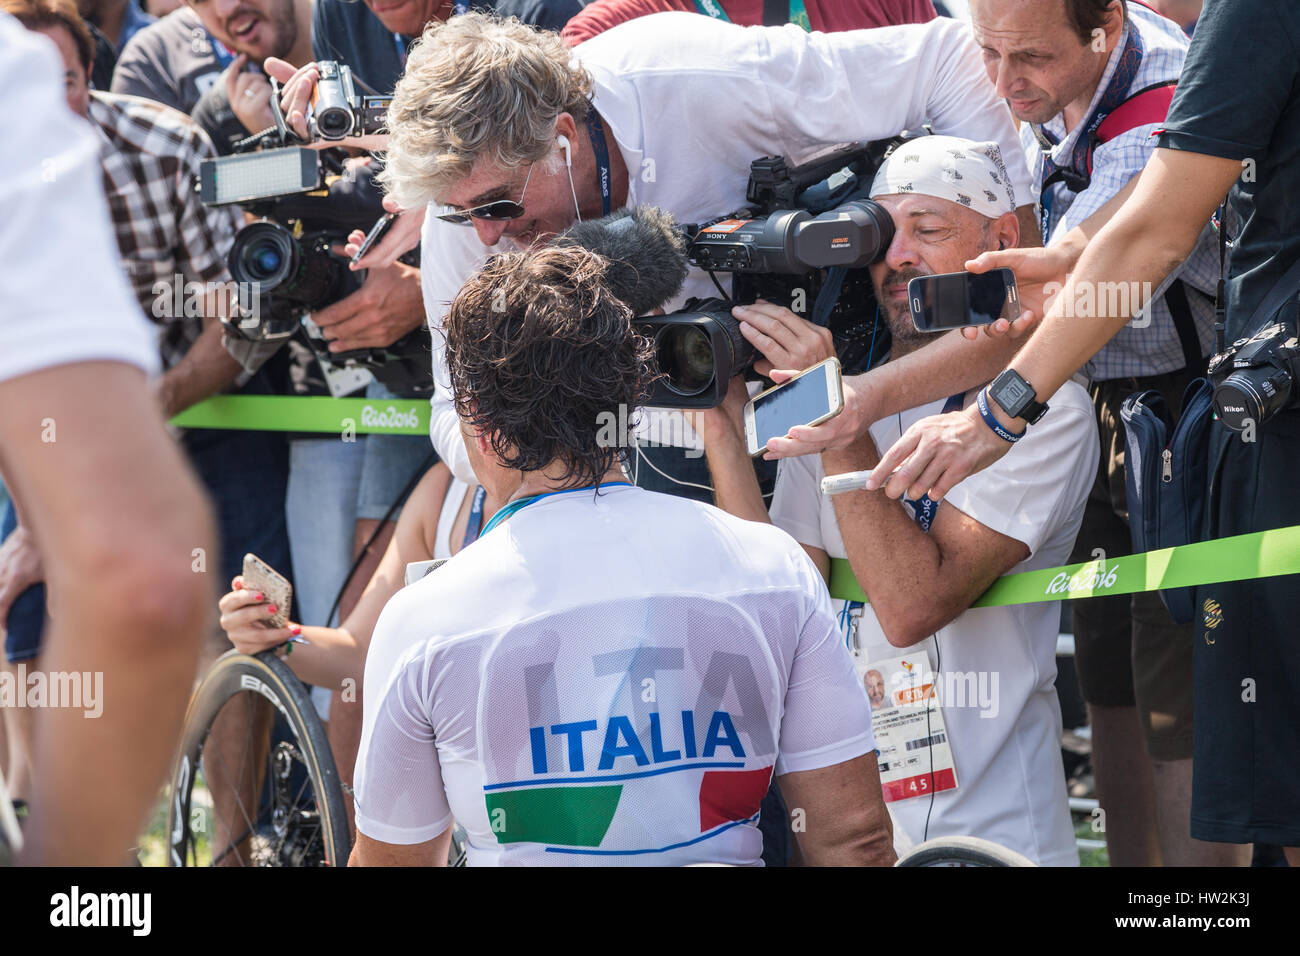 A lot of journalists trying to have an interview with the champion Alex Zanardi Stock Photo